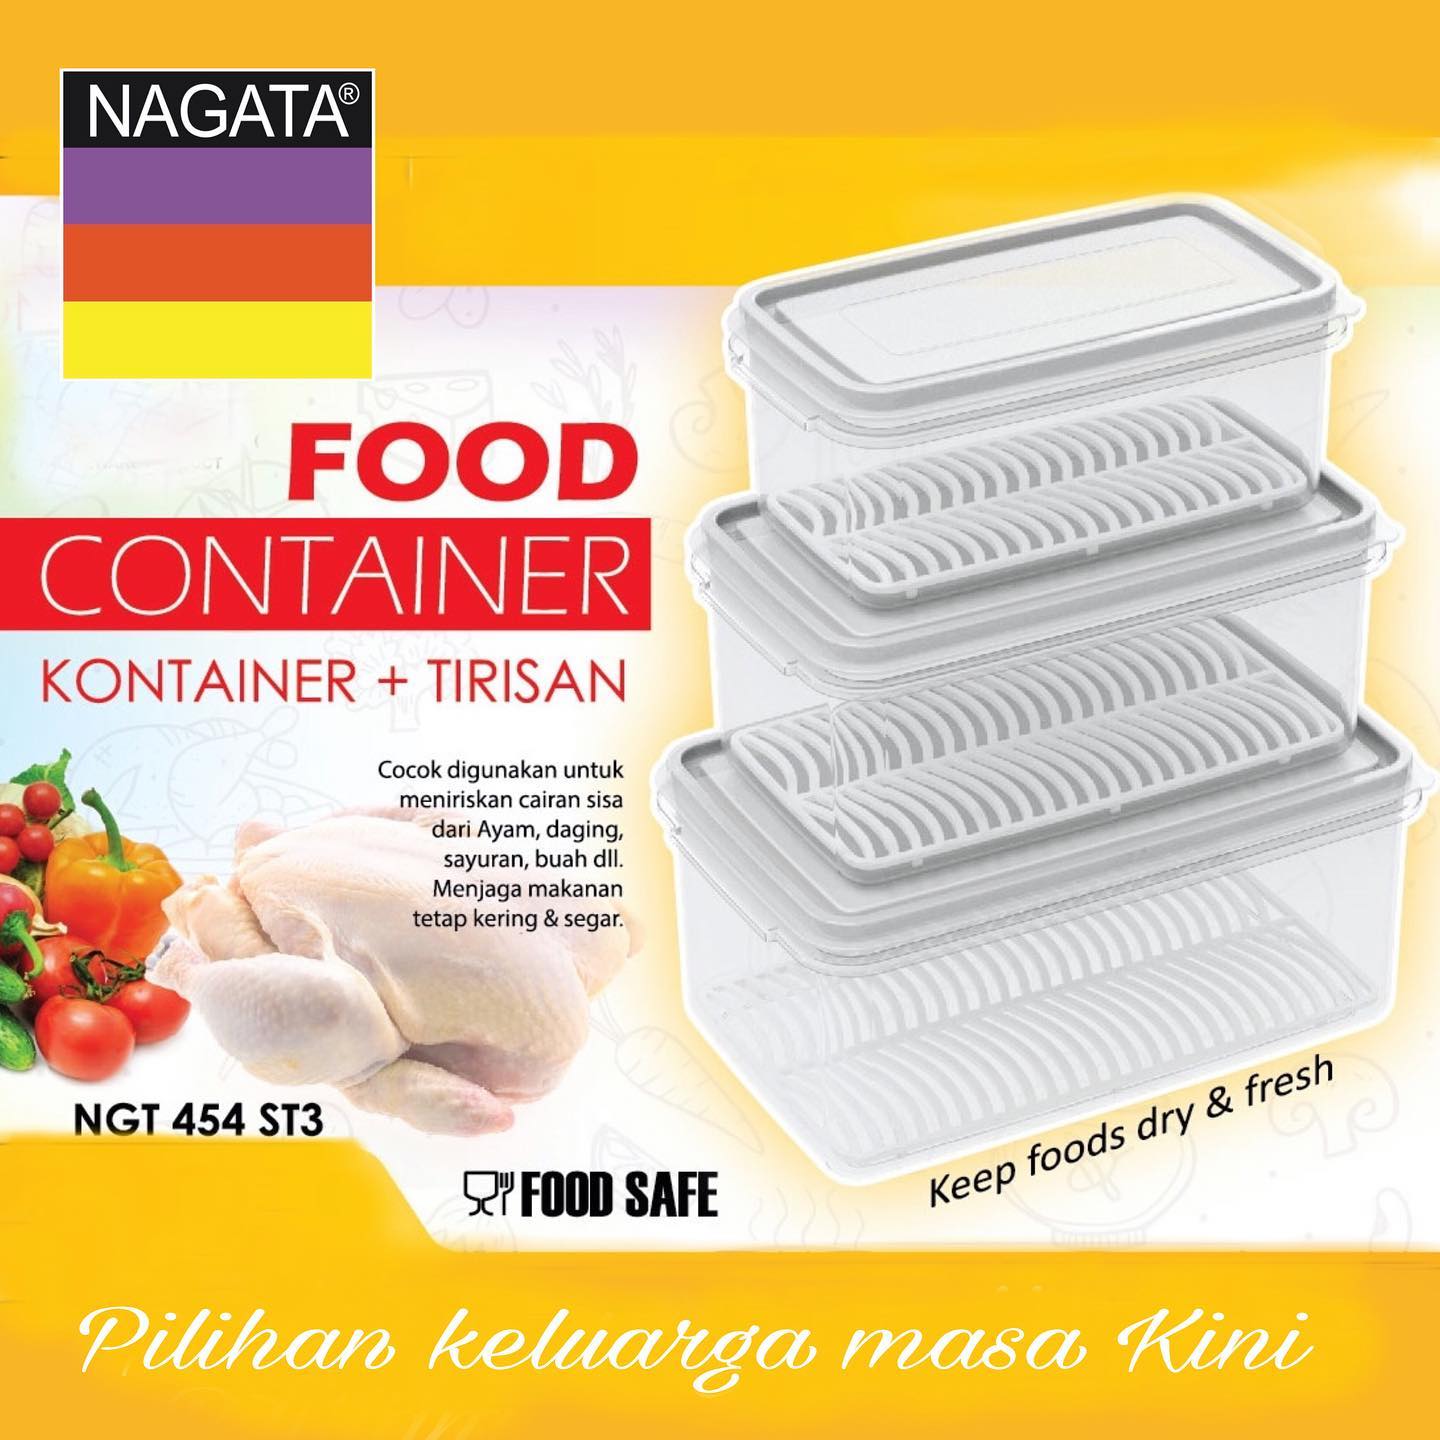 https://nagata.co.id/wp-content/uploads/2022/06/Food-Container.jpg